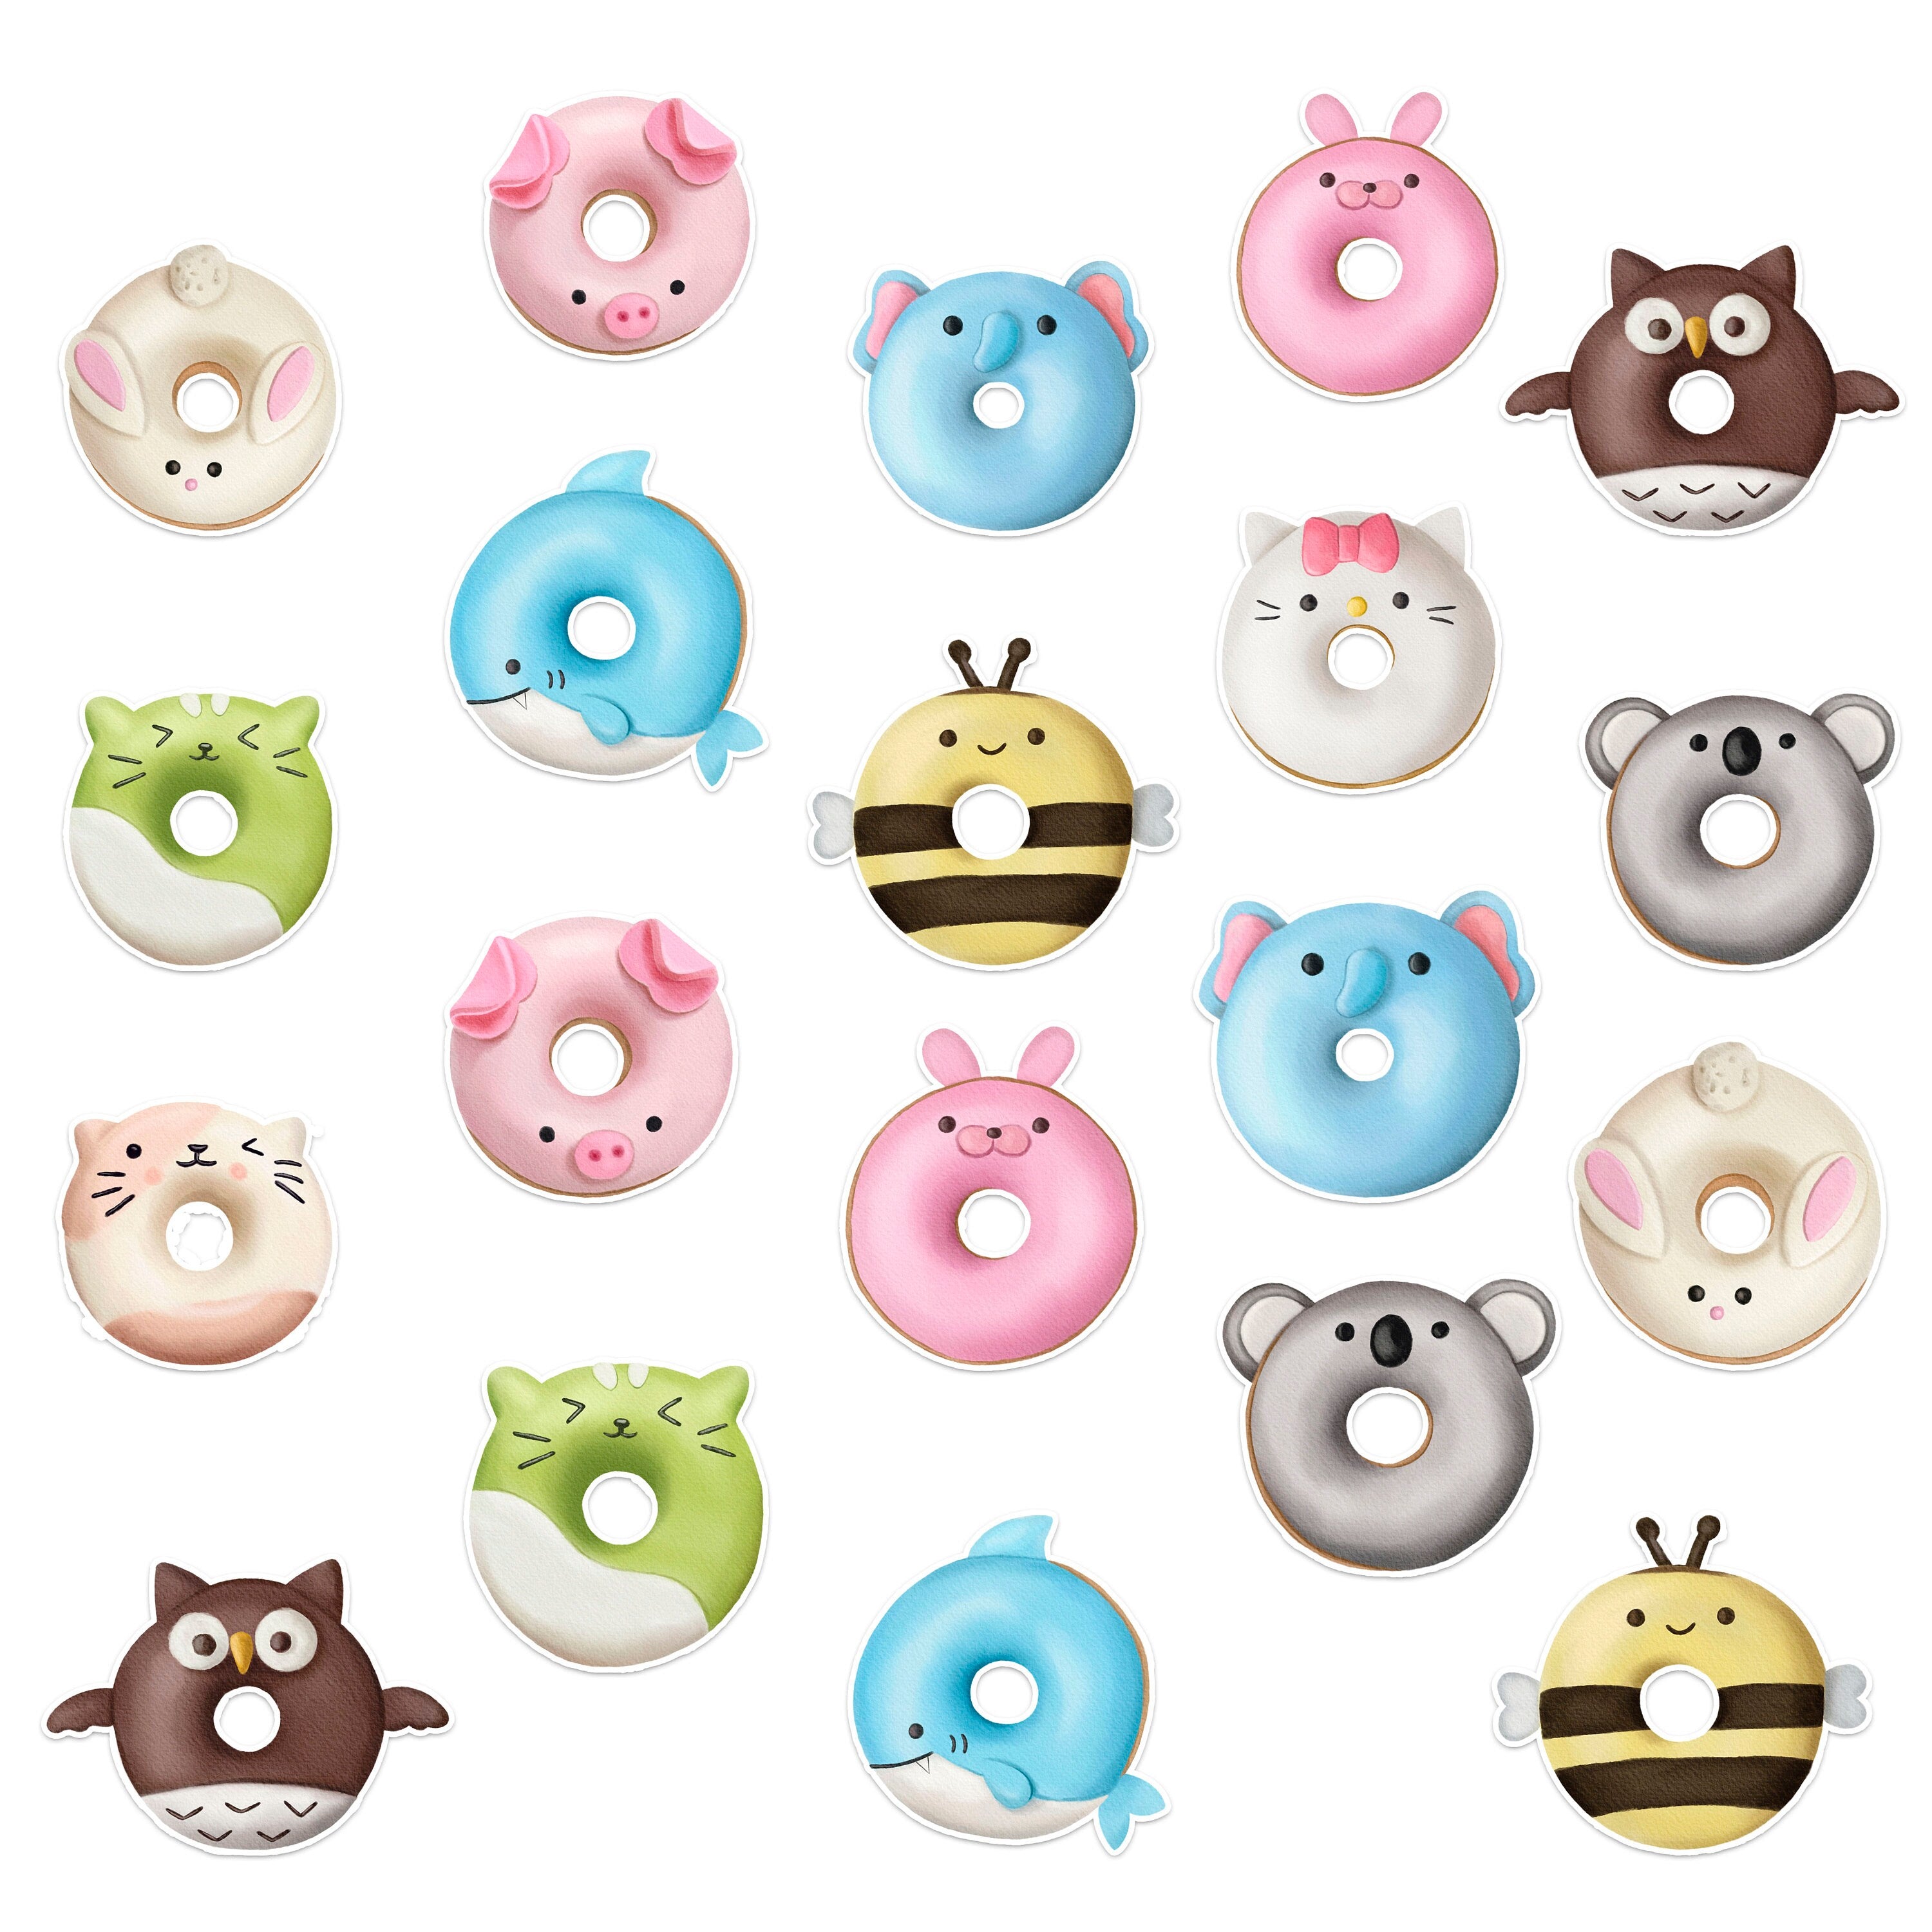 Squishy Donut Delights Stickers - 25pc Kawaii Donut Friends Collection